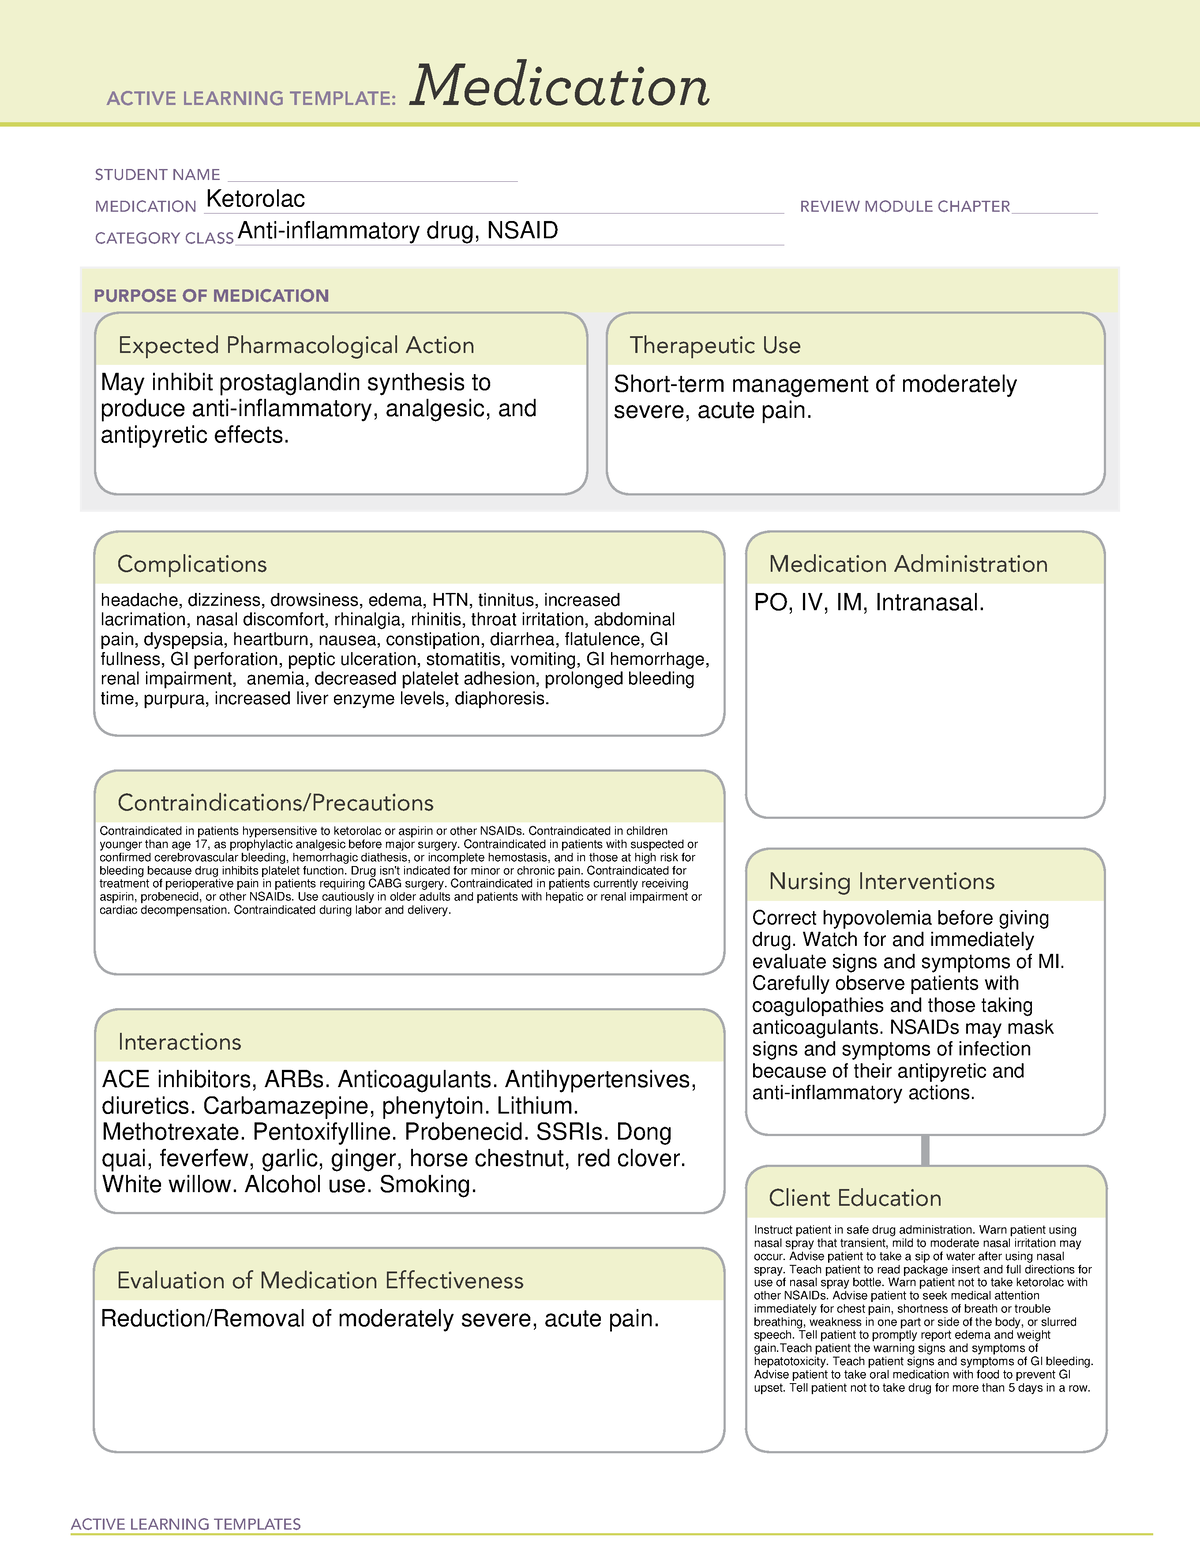 ATI medication template Ketorolac filled in ACTIVE LEARNING